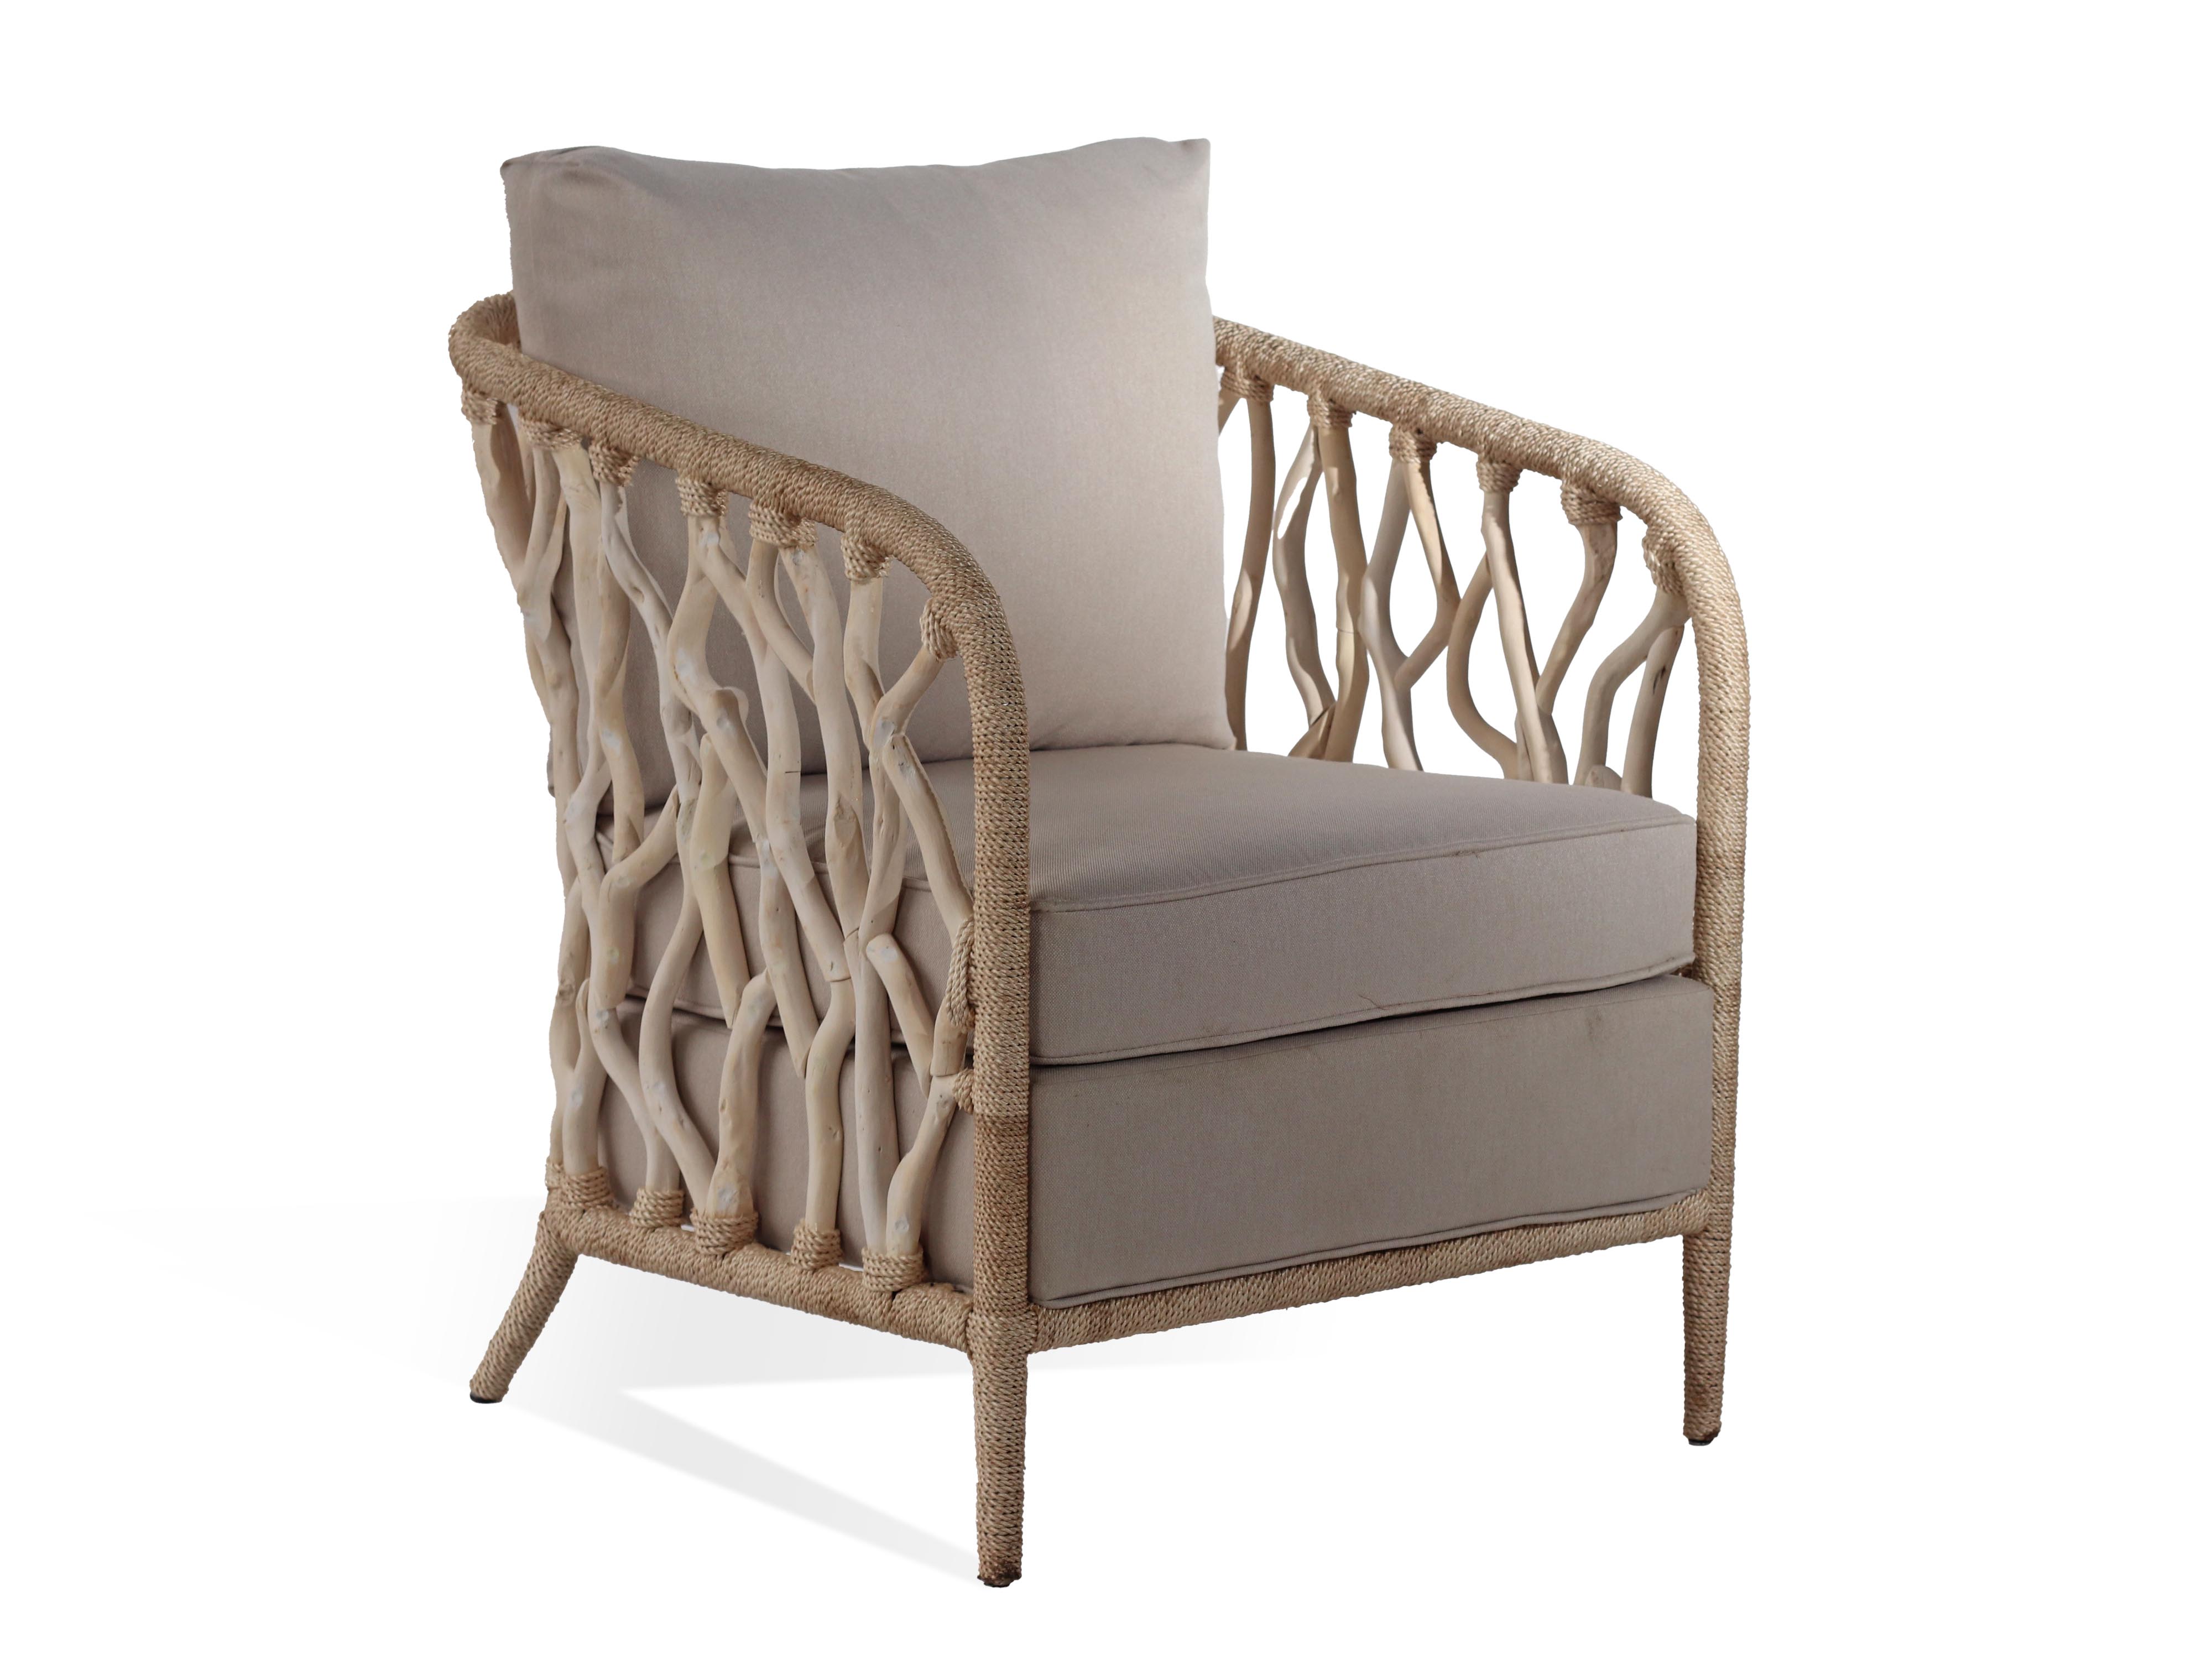 Driftwood Accent Chair - White